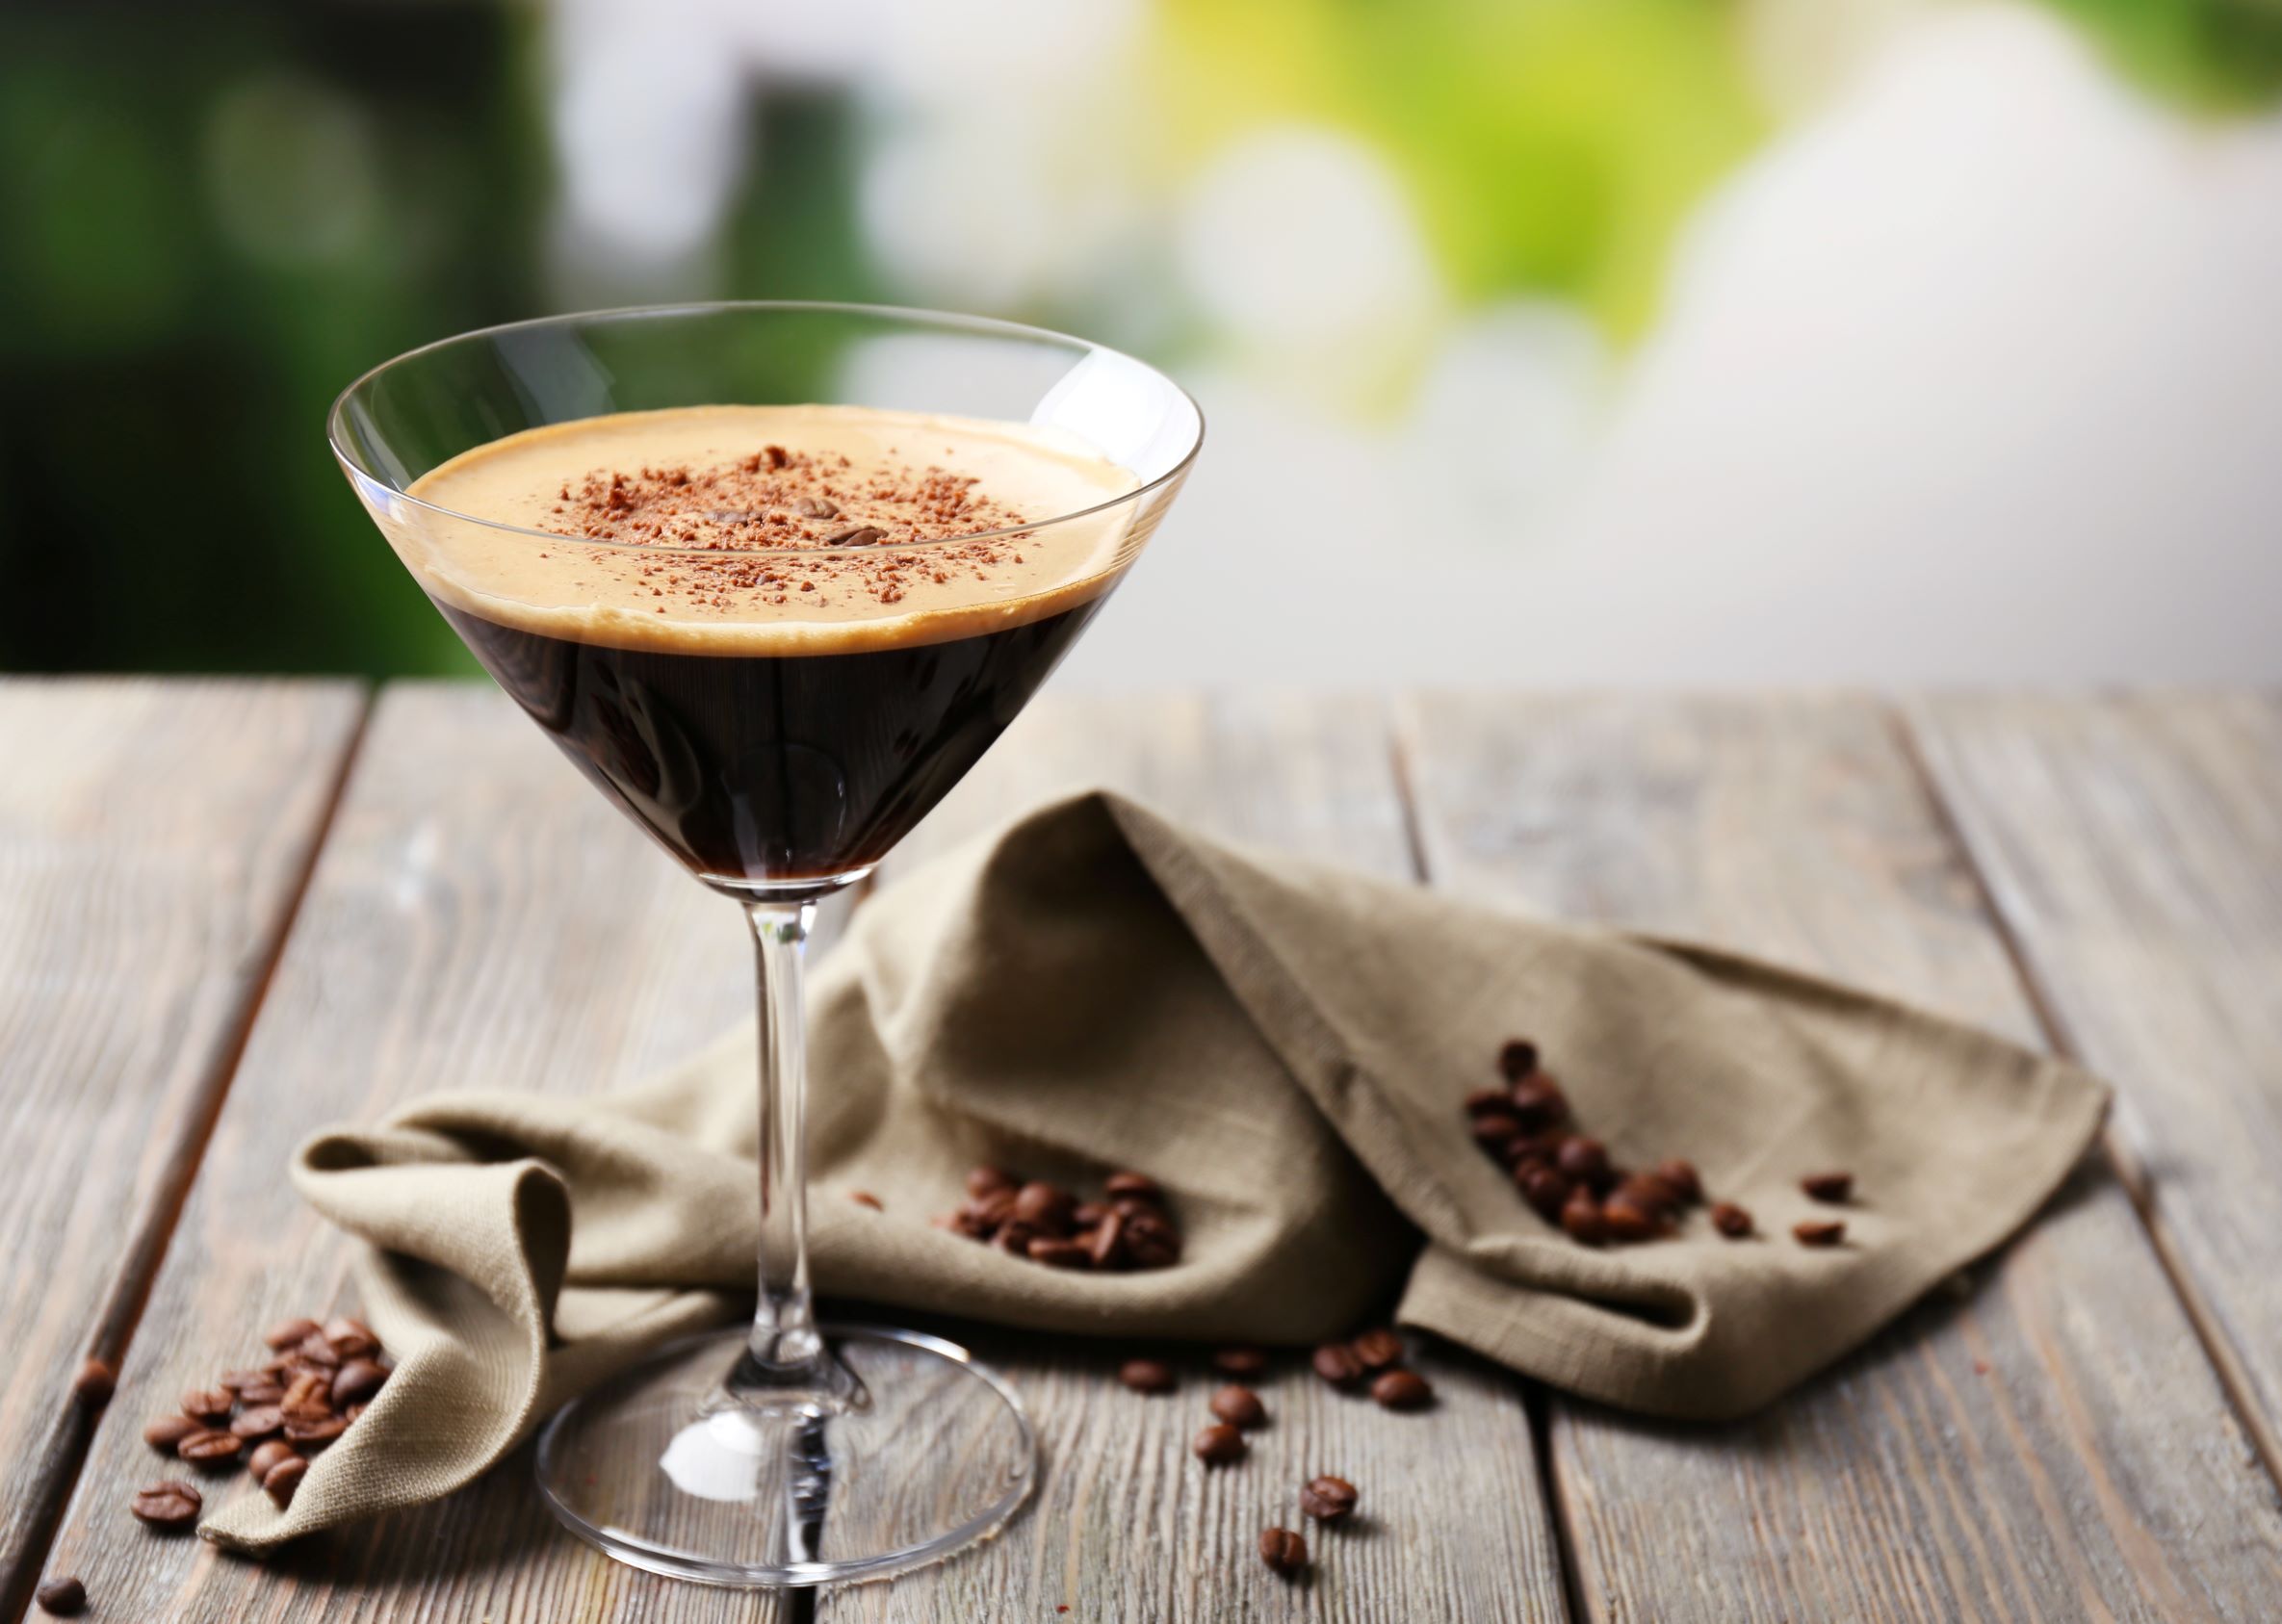 Classy glass of espresso martini on a wooden table with a kitchen cloth and coffee beans